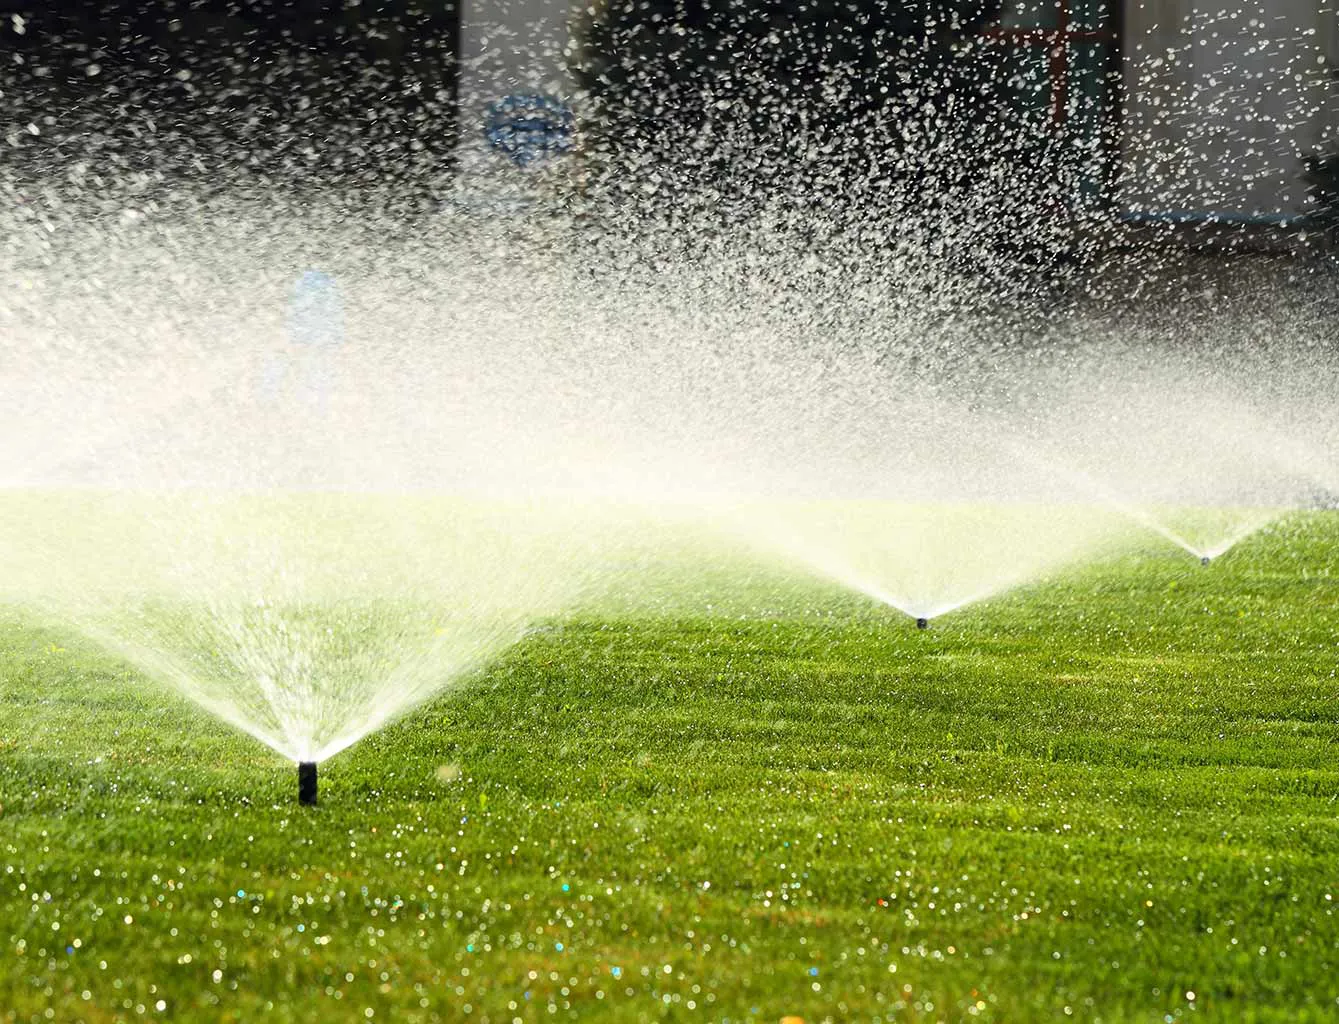 Reliable-Irrigation-System-Watering-Lawn